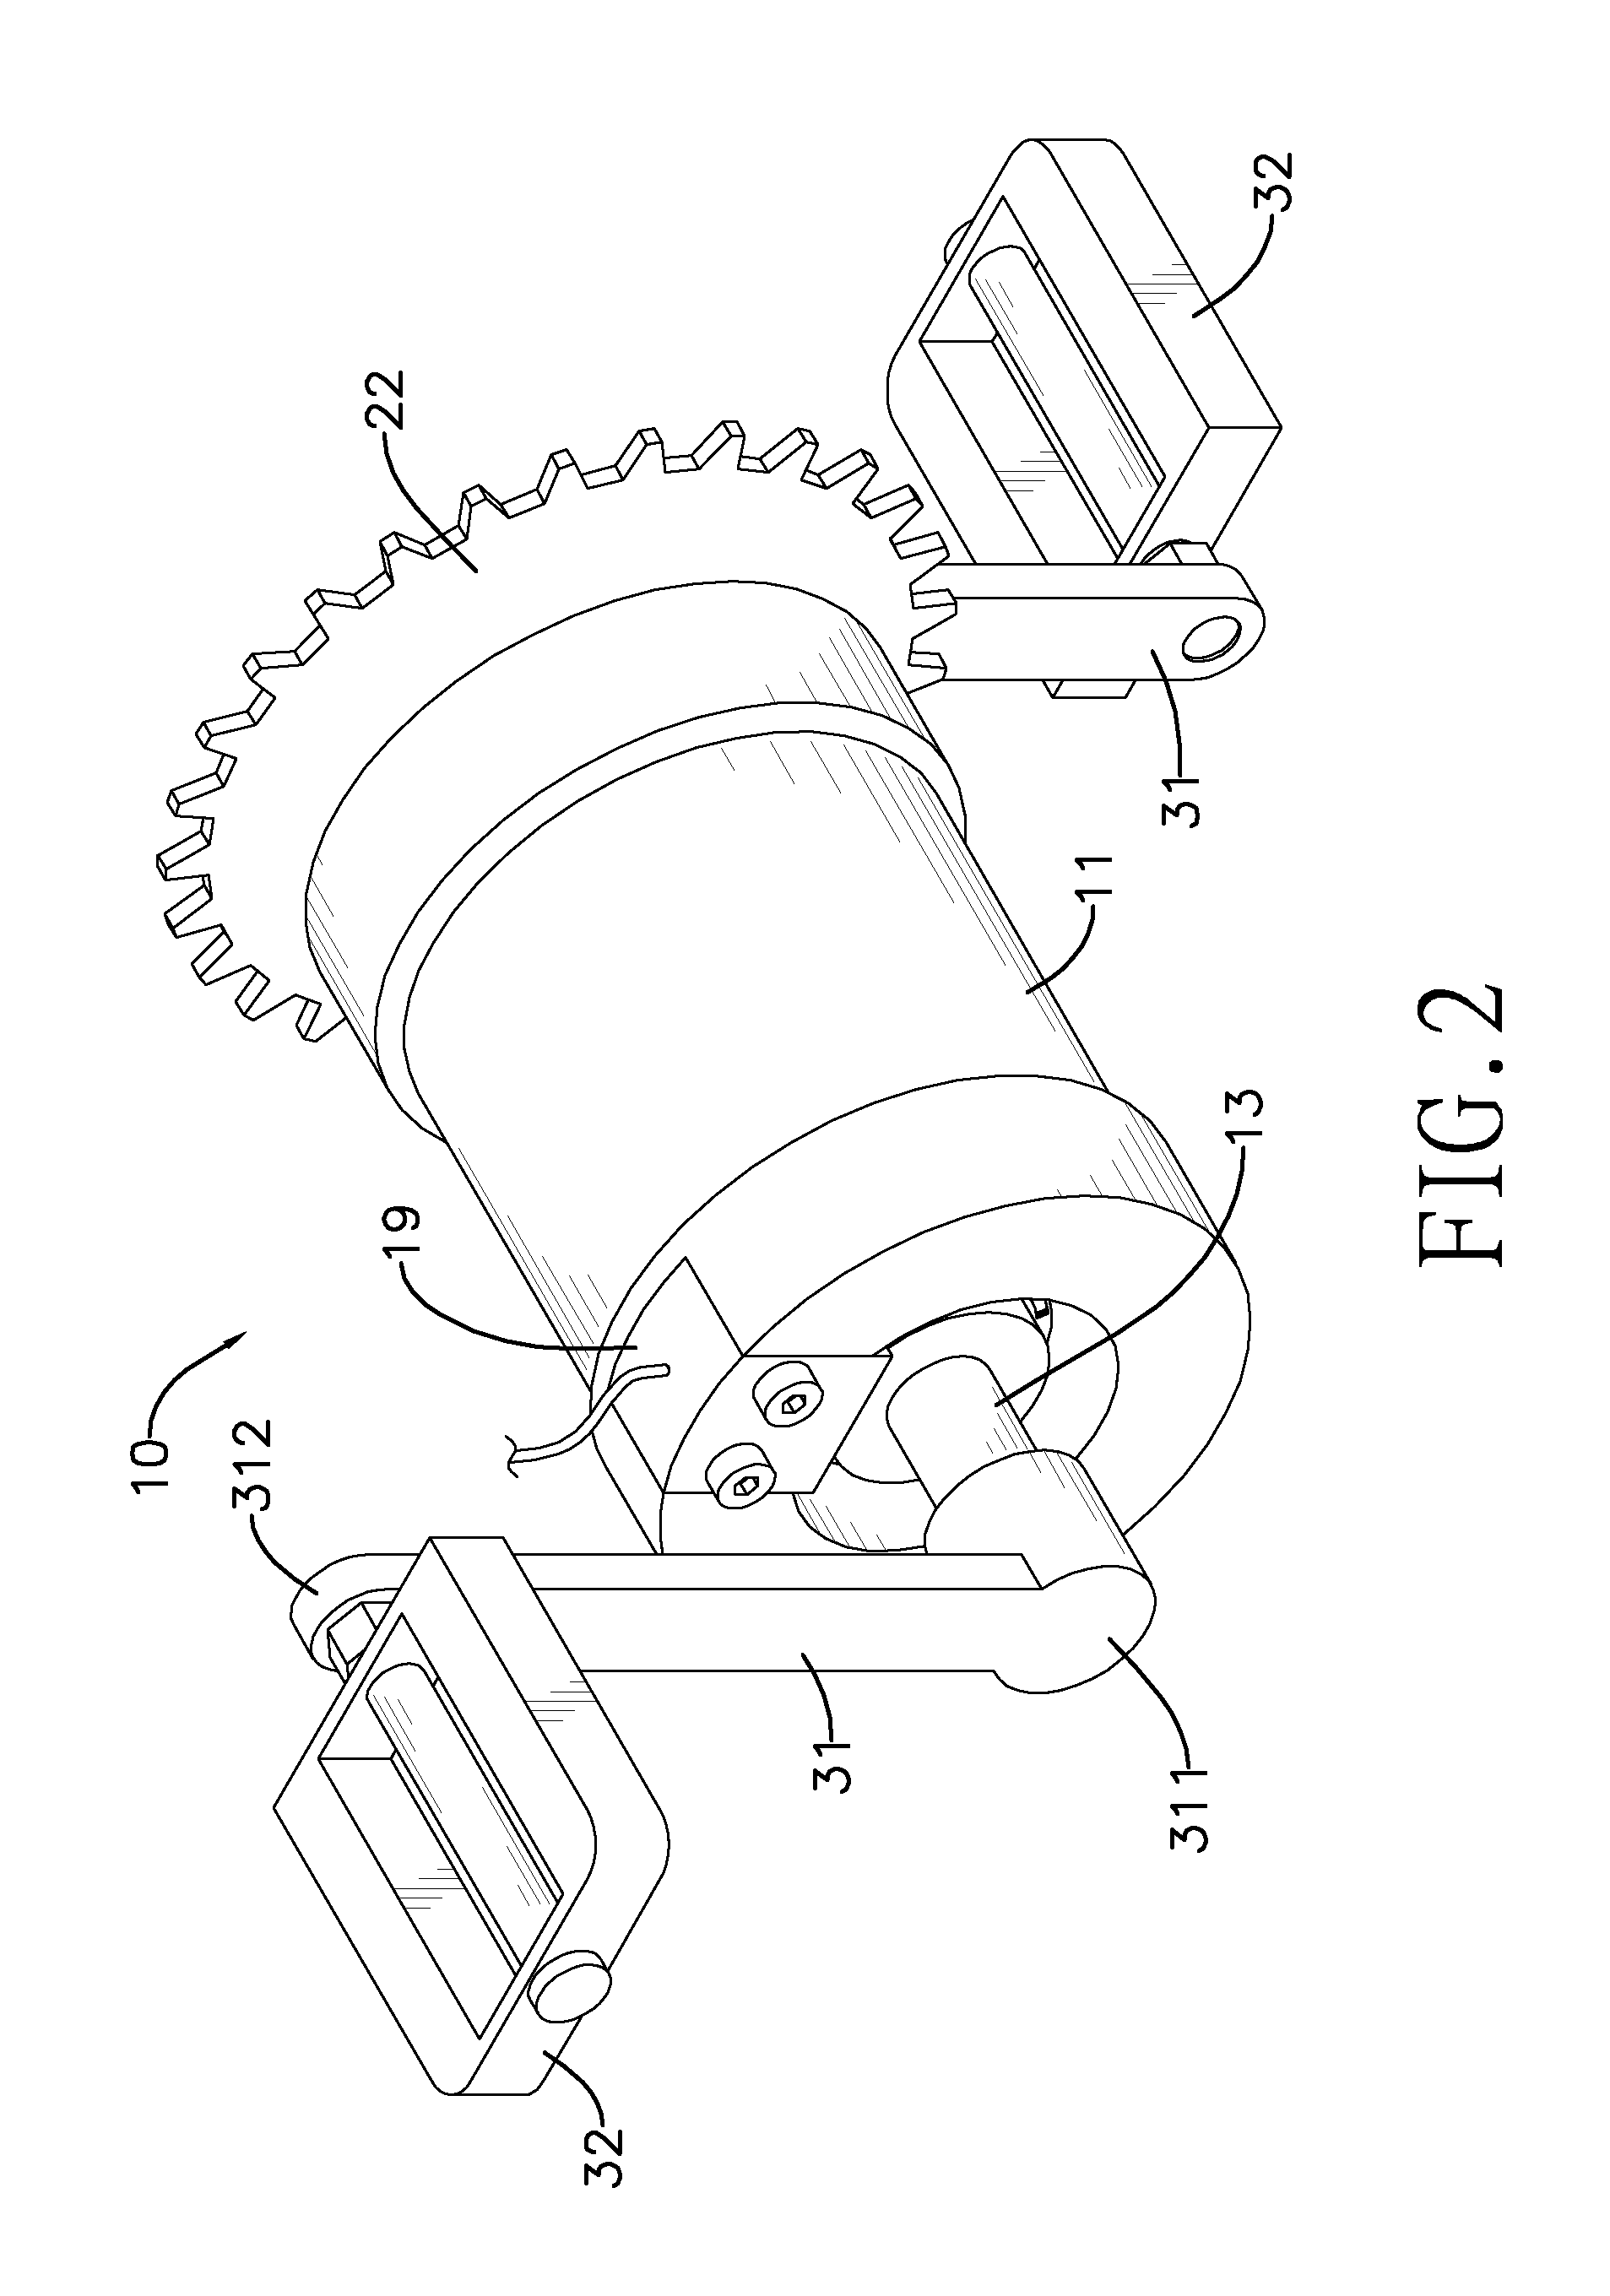 Torque sensor assembly for a power-assisted bicycle